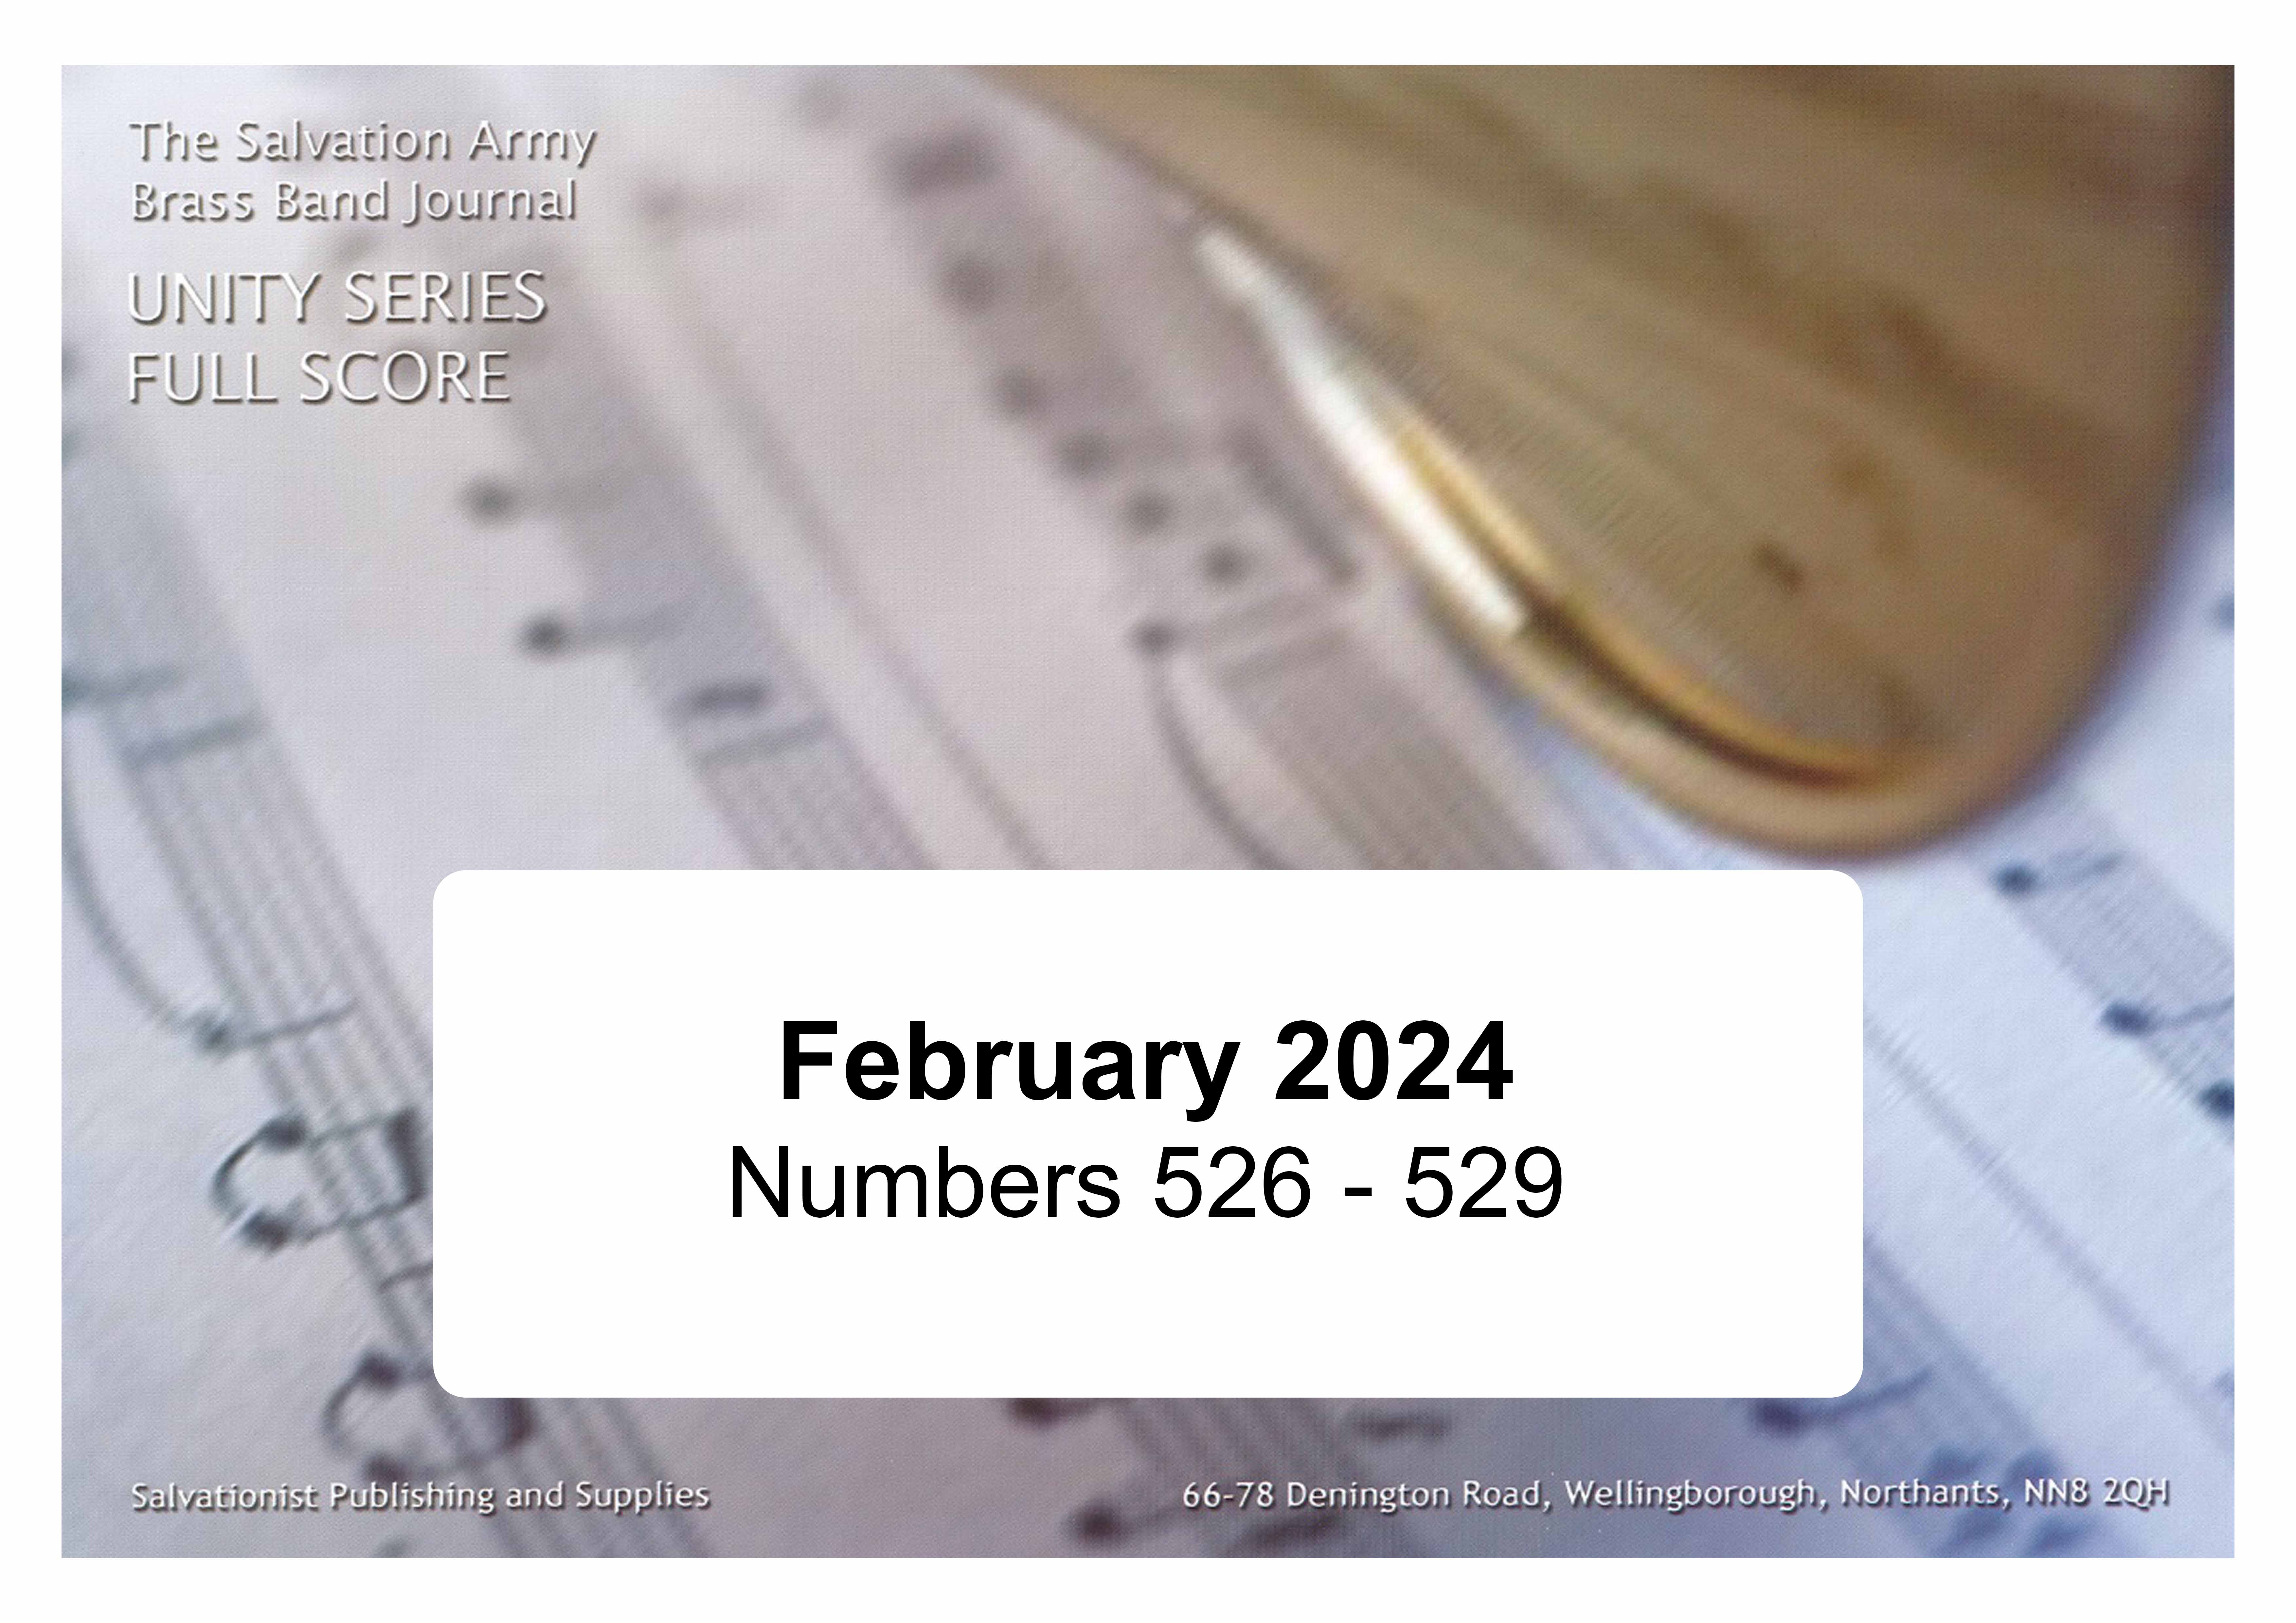 Unity Series Band Journal - Numbers 526 - 529, February 2024